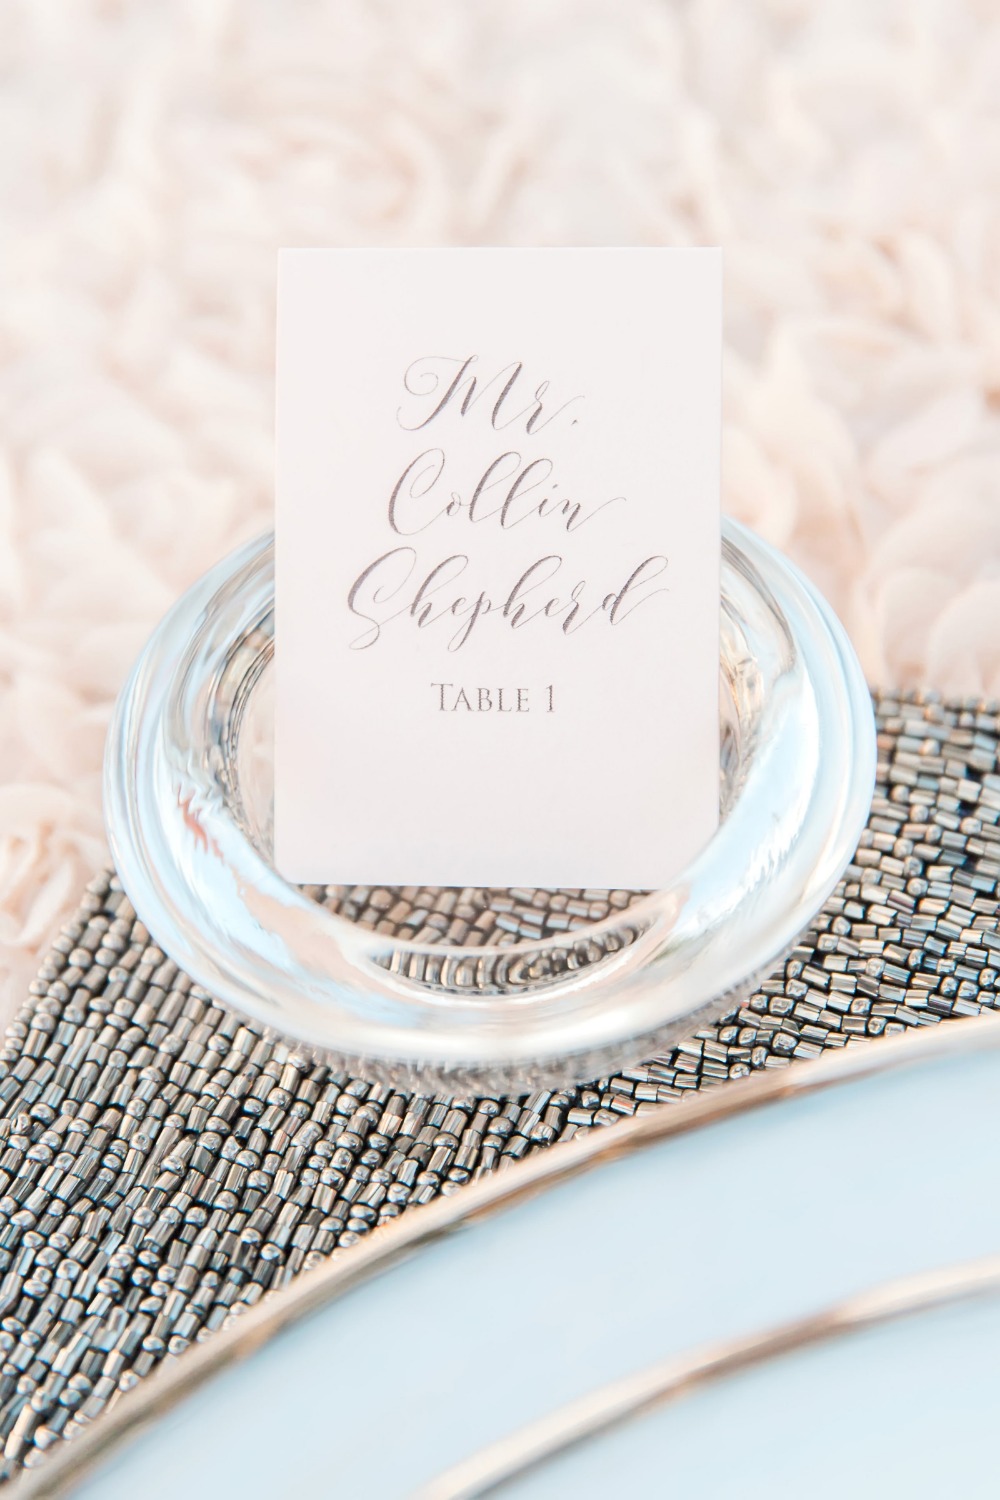 Blush place card with calligraphy